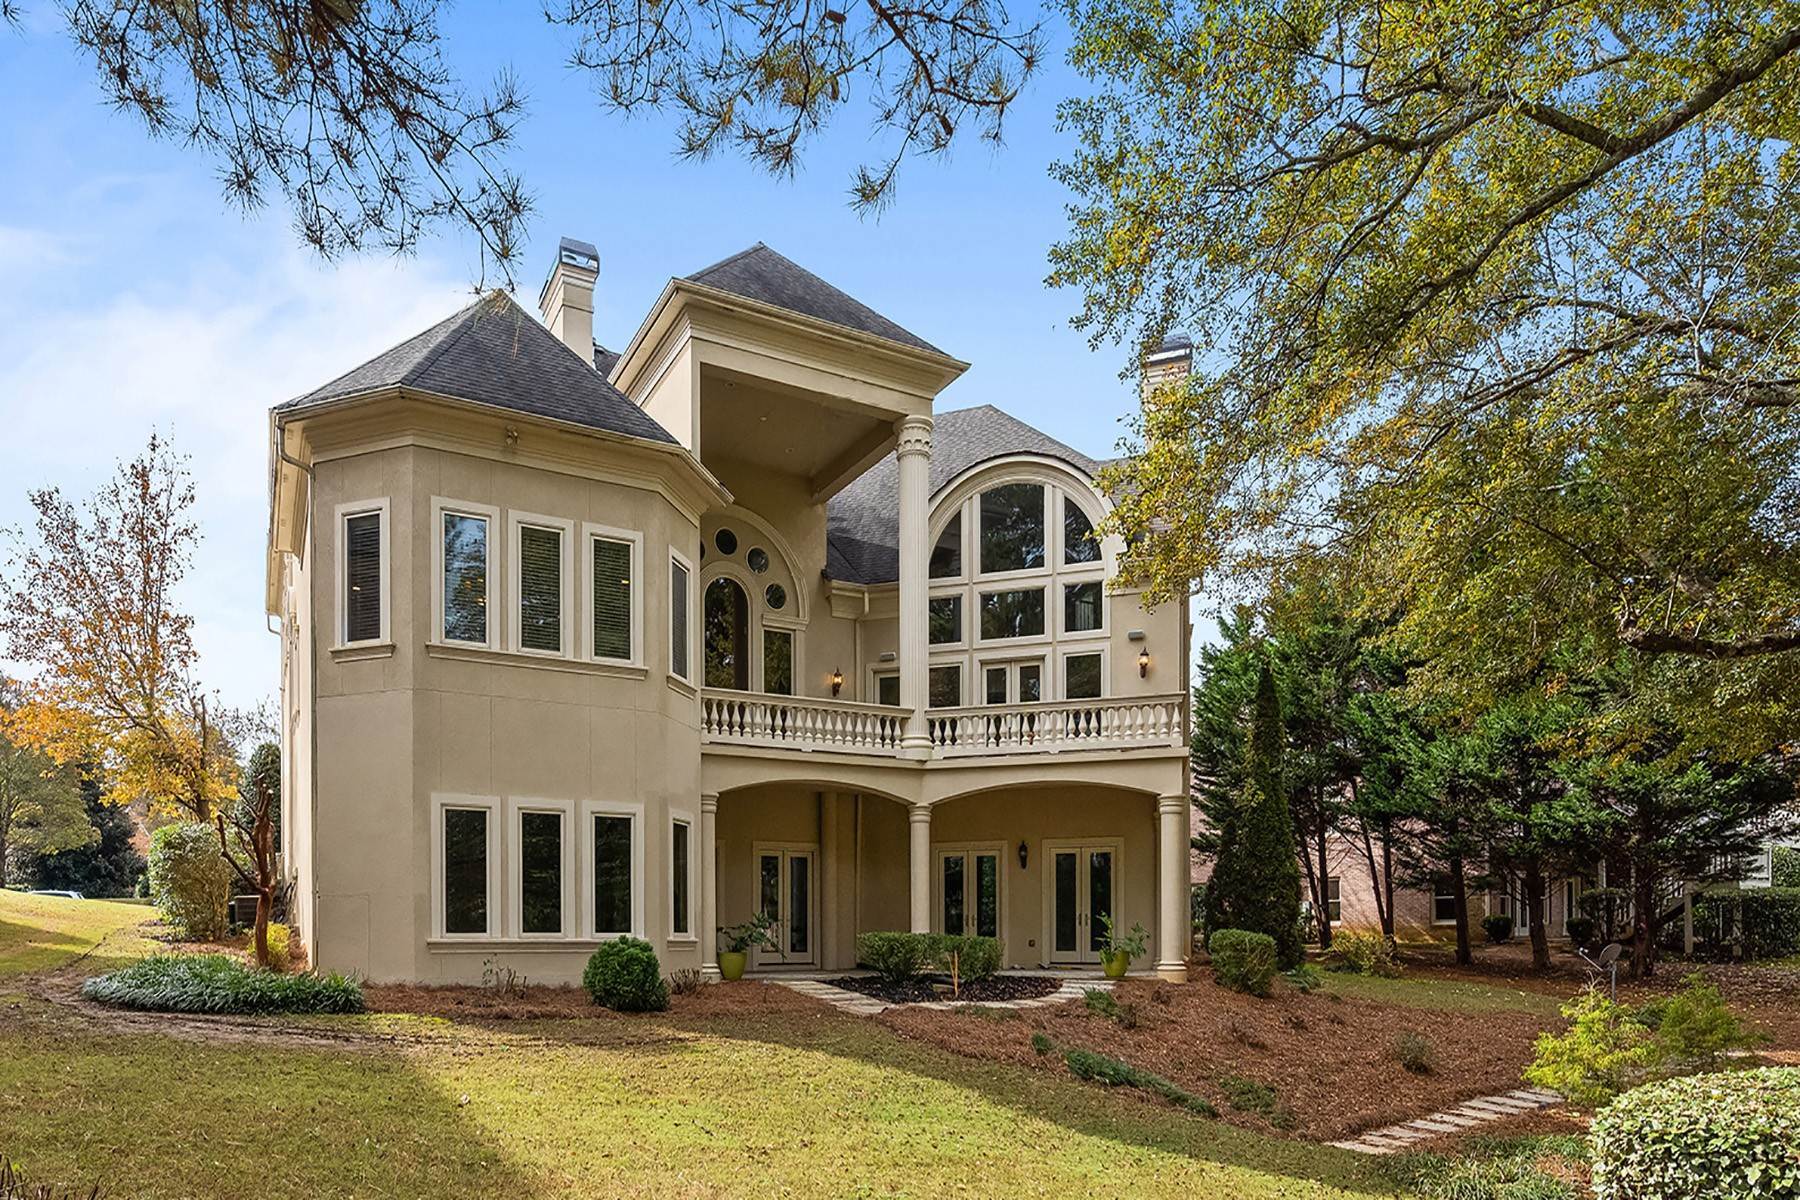 47. Single Family Homes for Sale at Prestigious St. Marlo Country Club Home Overlooking the 5th Fairway 8430 Abingdon Lane Duluth, Georgia 30097 United States